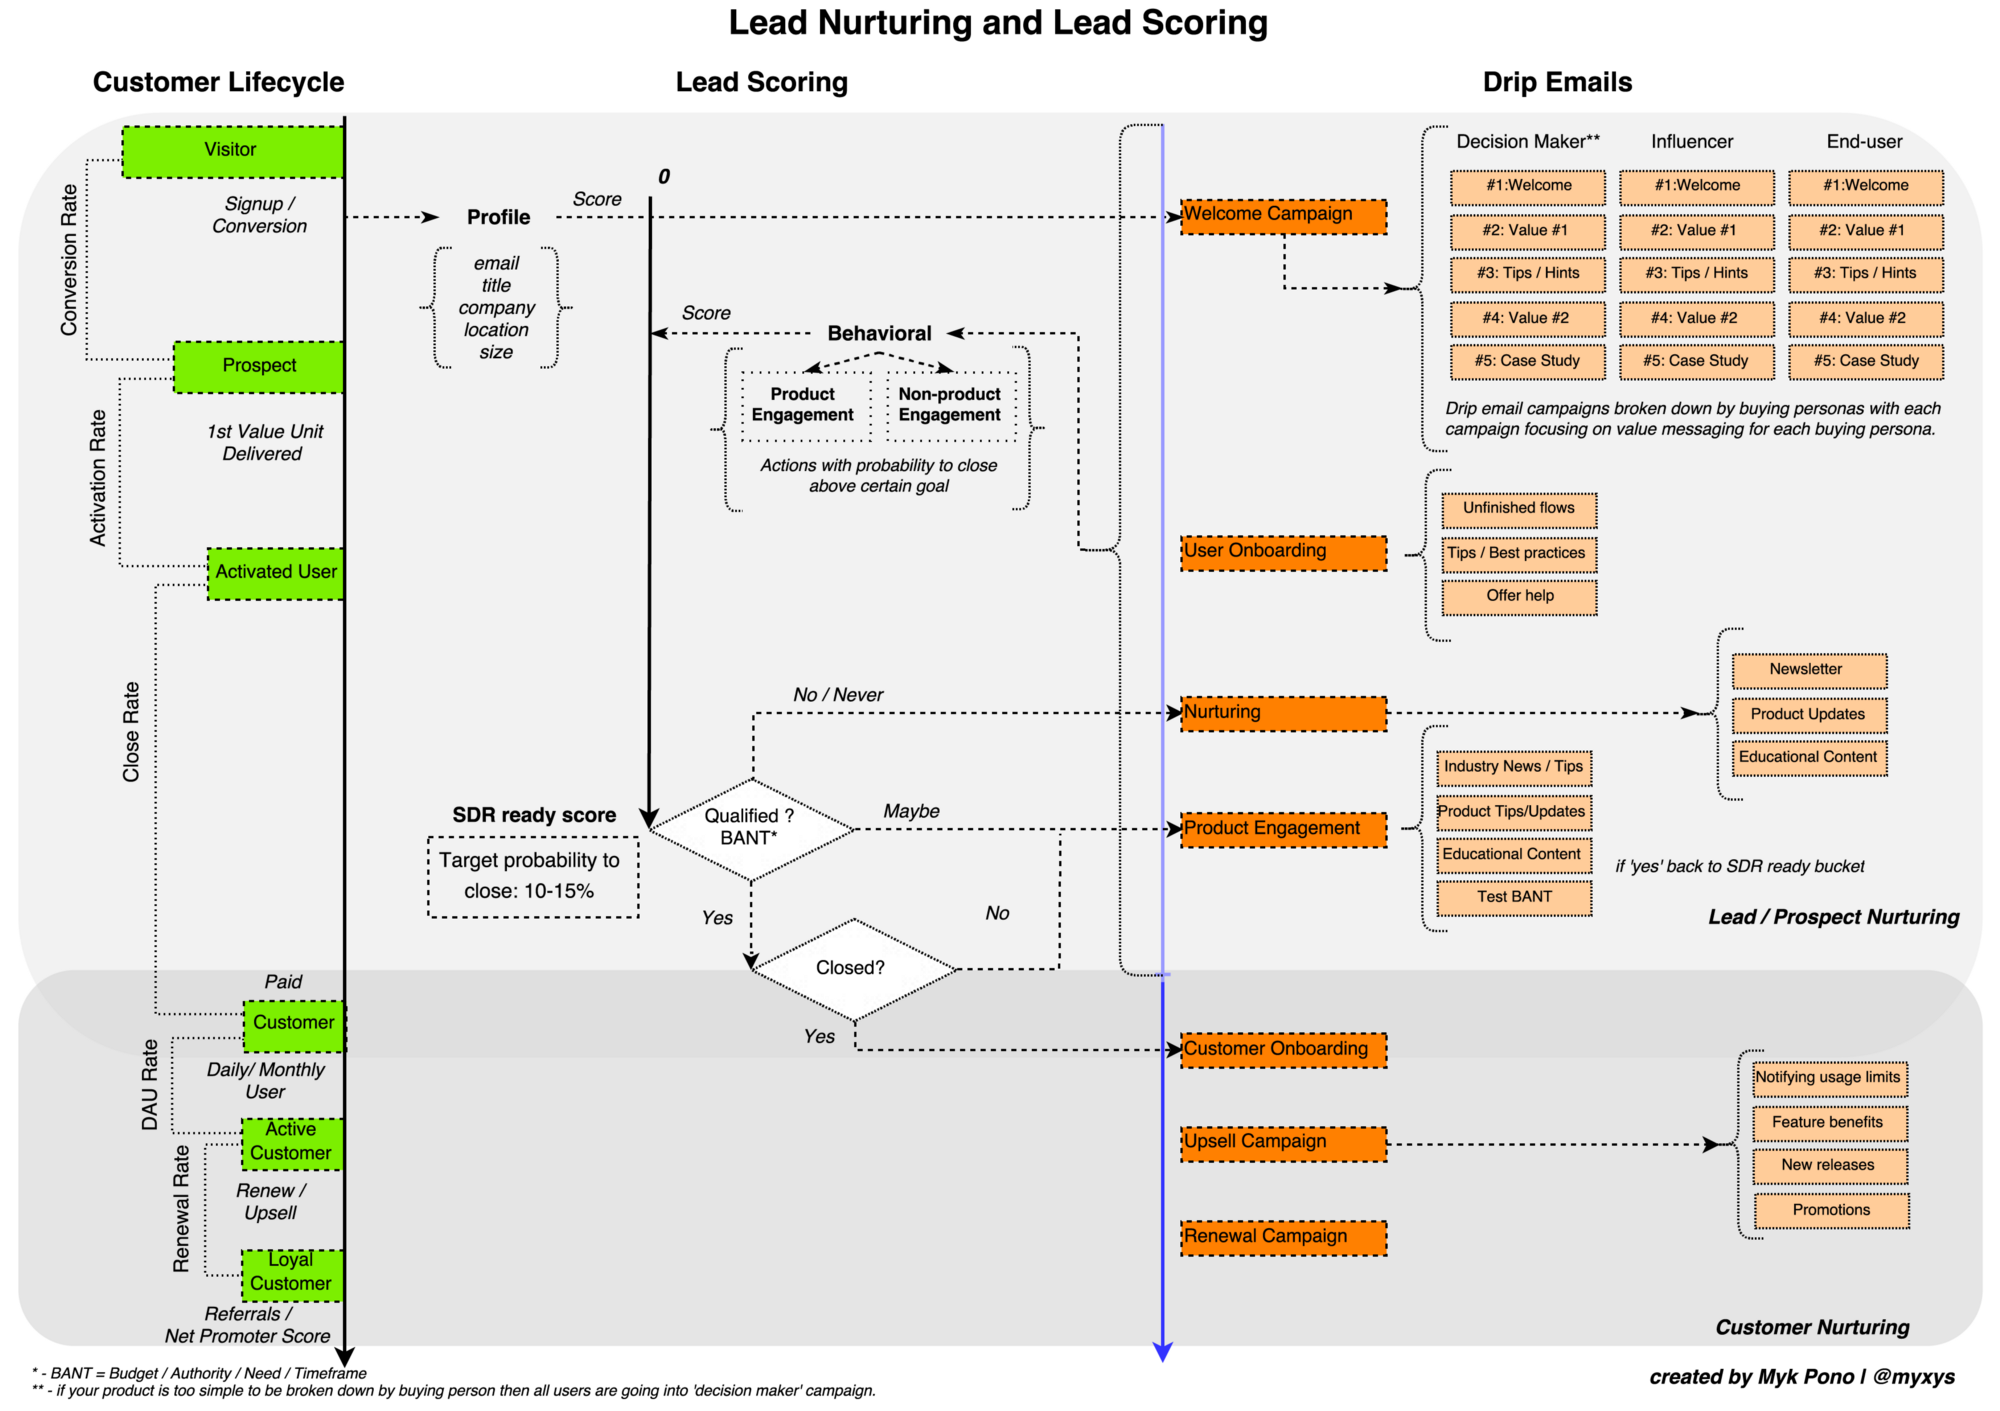 How To Design Lead Nurturing, Lead Scoring, and Drip Email Campaigns